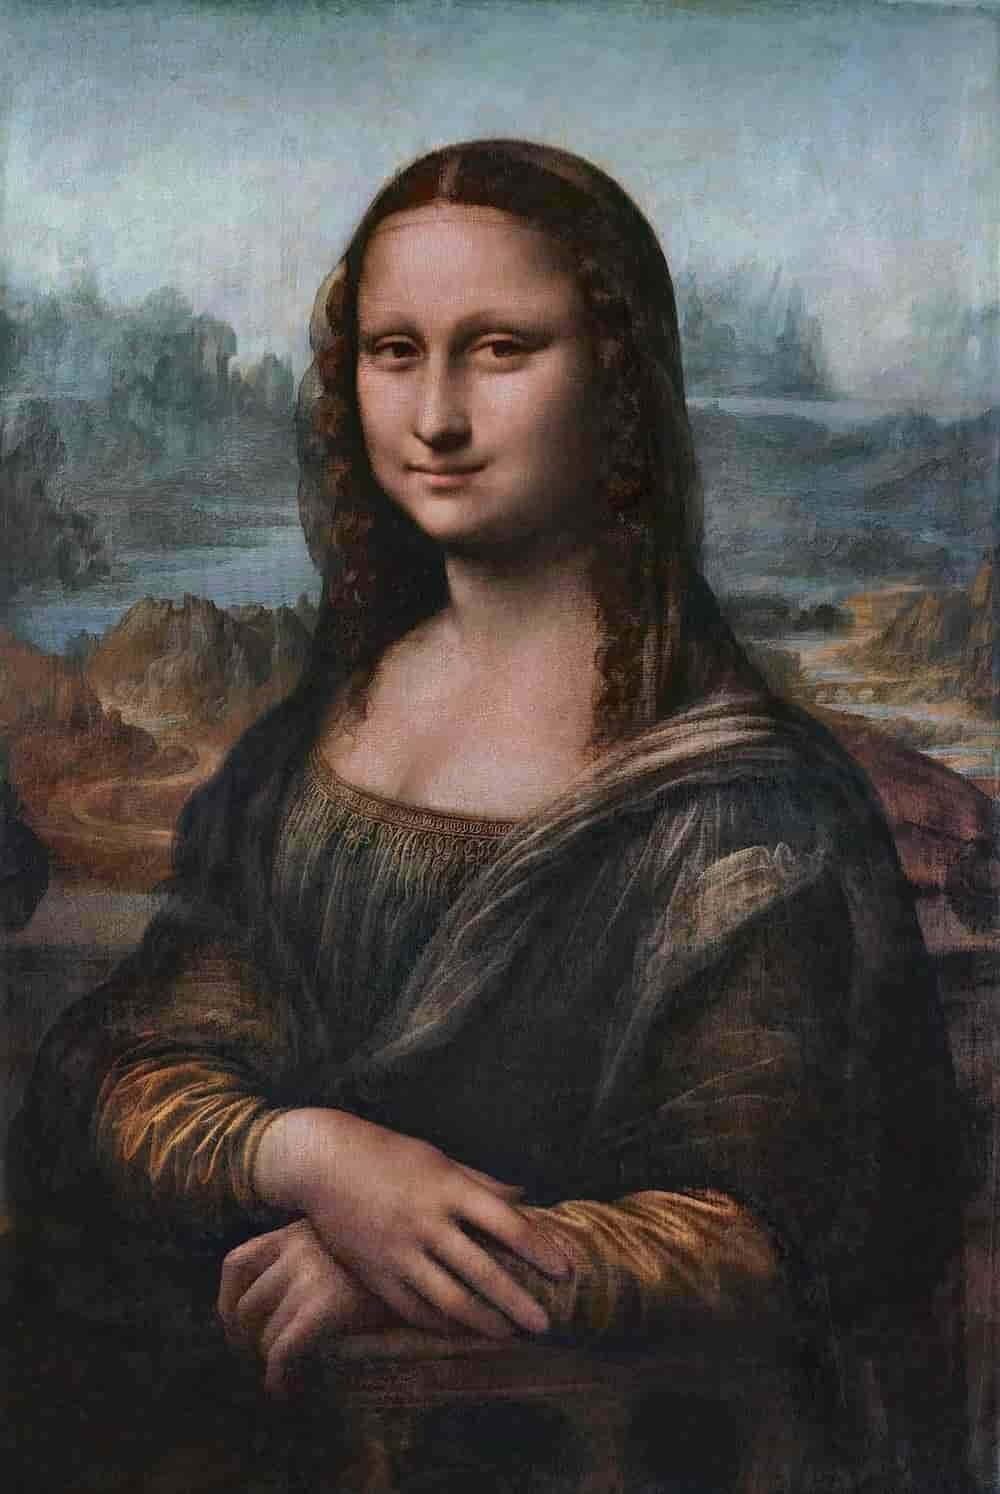 Monalisa the most famous painting in the world